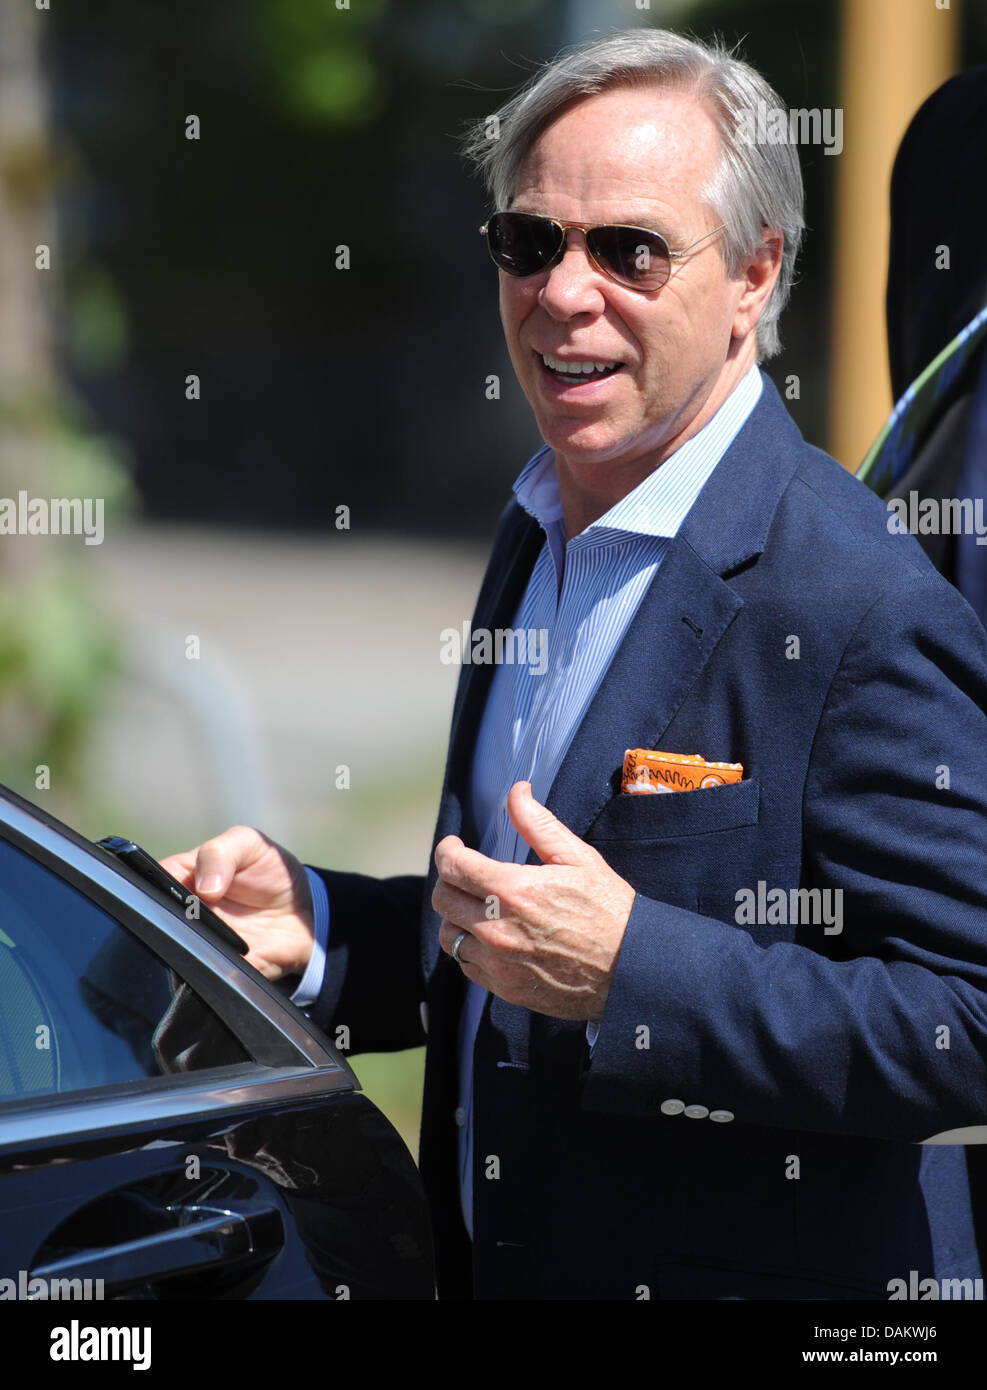 US fashion designer Tommy Hilfiger gets in his car after his visit to the  Akademie JAK for fashion design in Hamburg, Germany, 09 May 2011. Hilfiger  discussed his typical 